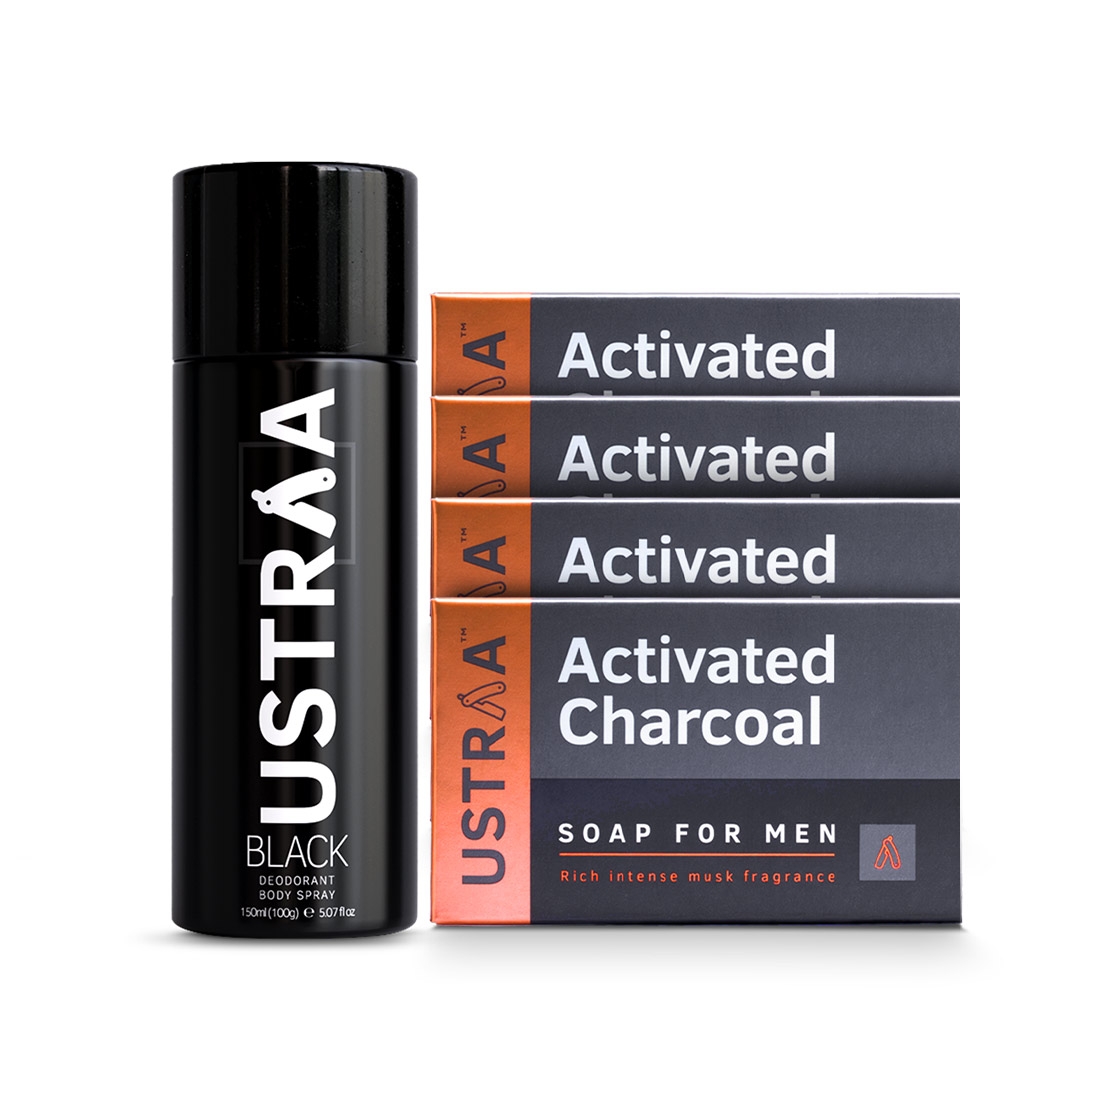 Ustraa | Ustraa Black Deodorant 150 ml & Activated Charcoal Soap 100g (Pack of 4)